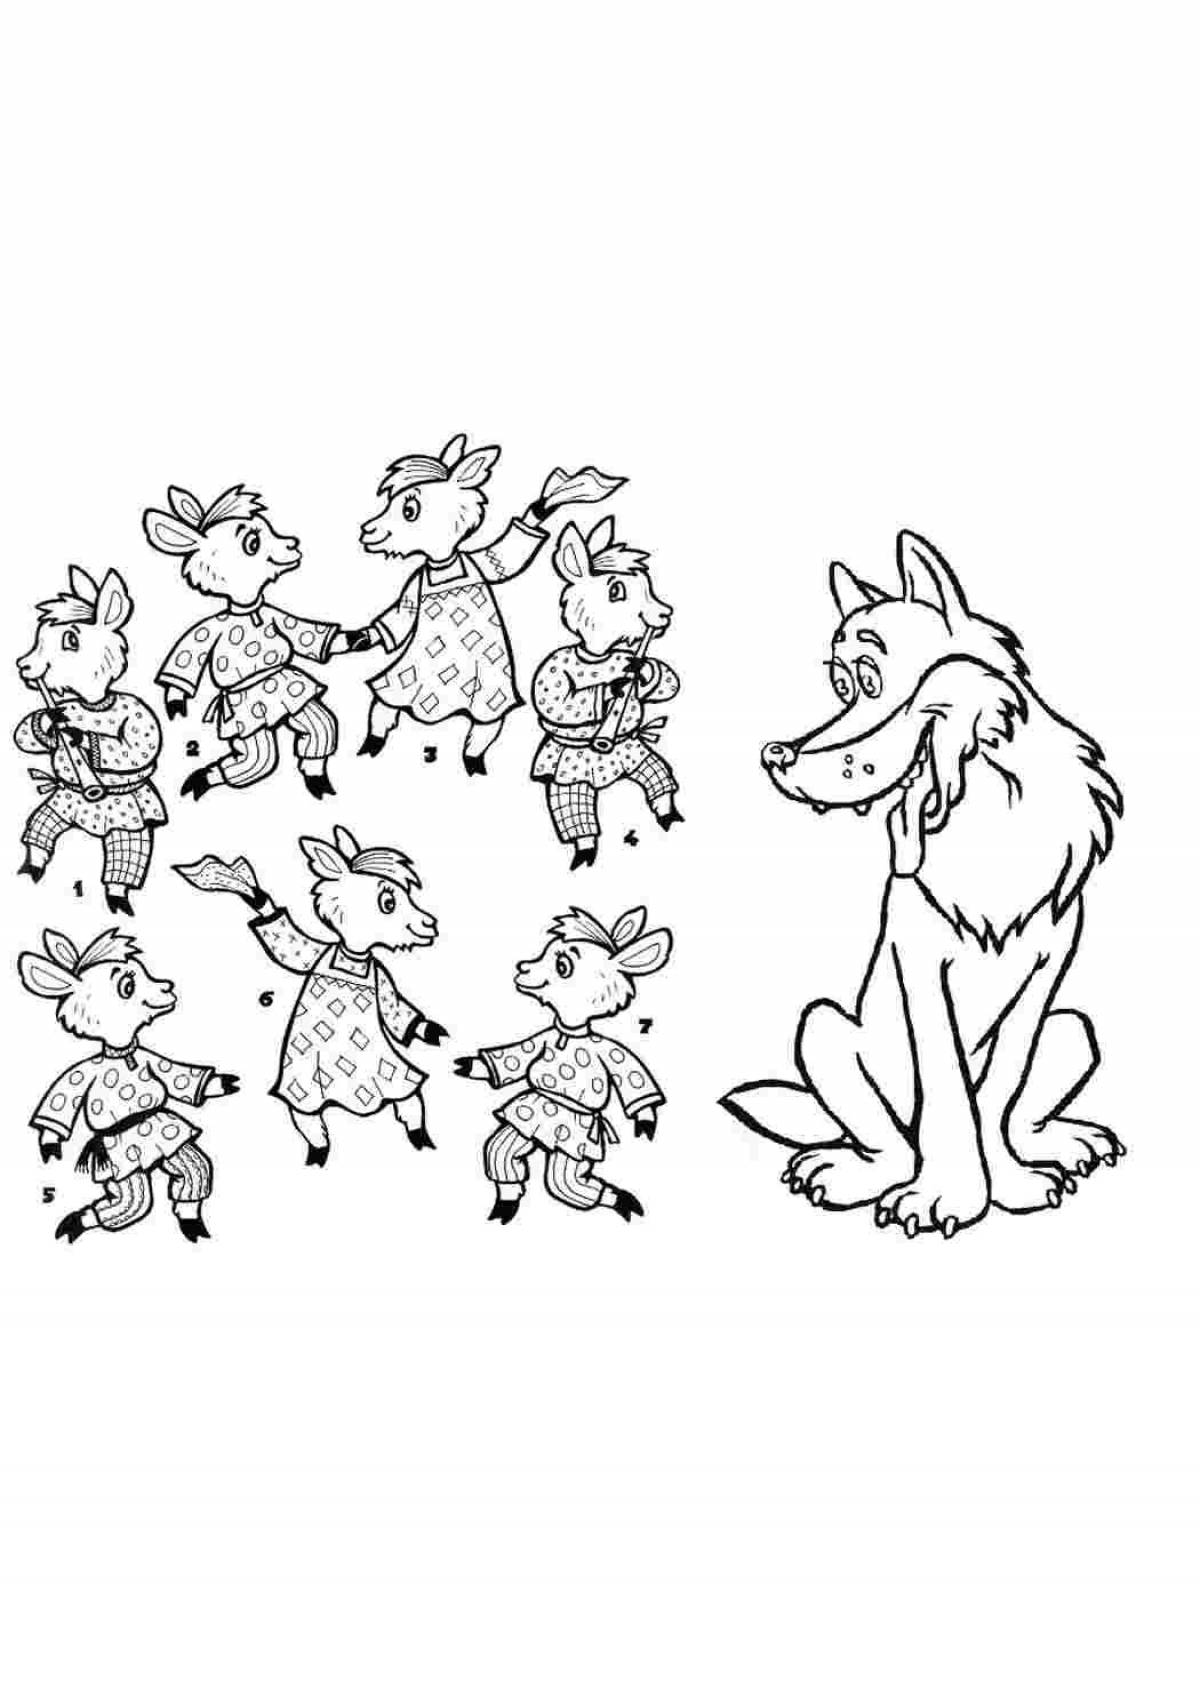 Glamorous wolf and seven kids coloring page